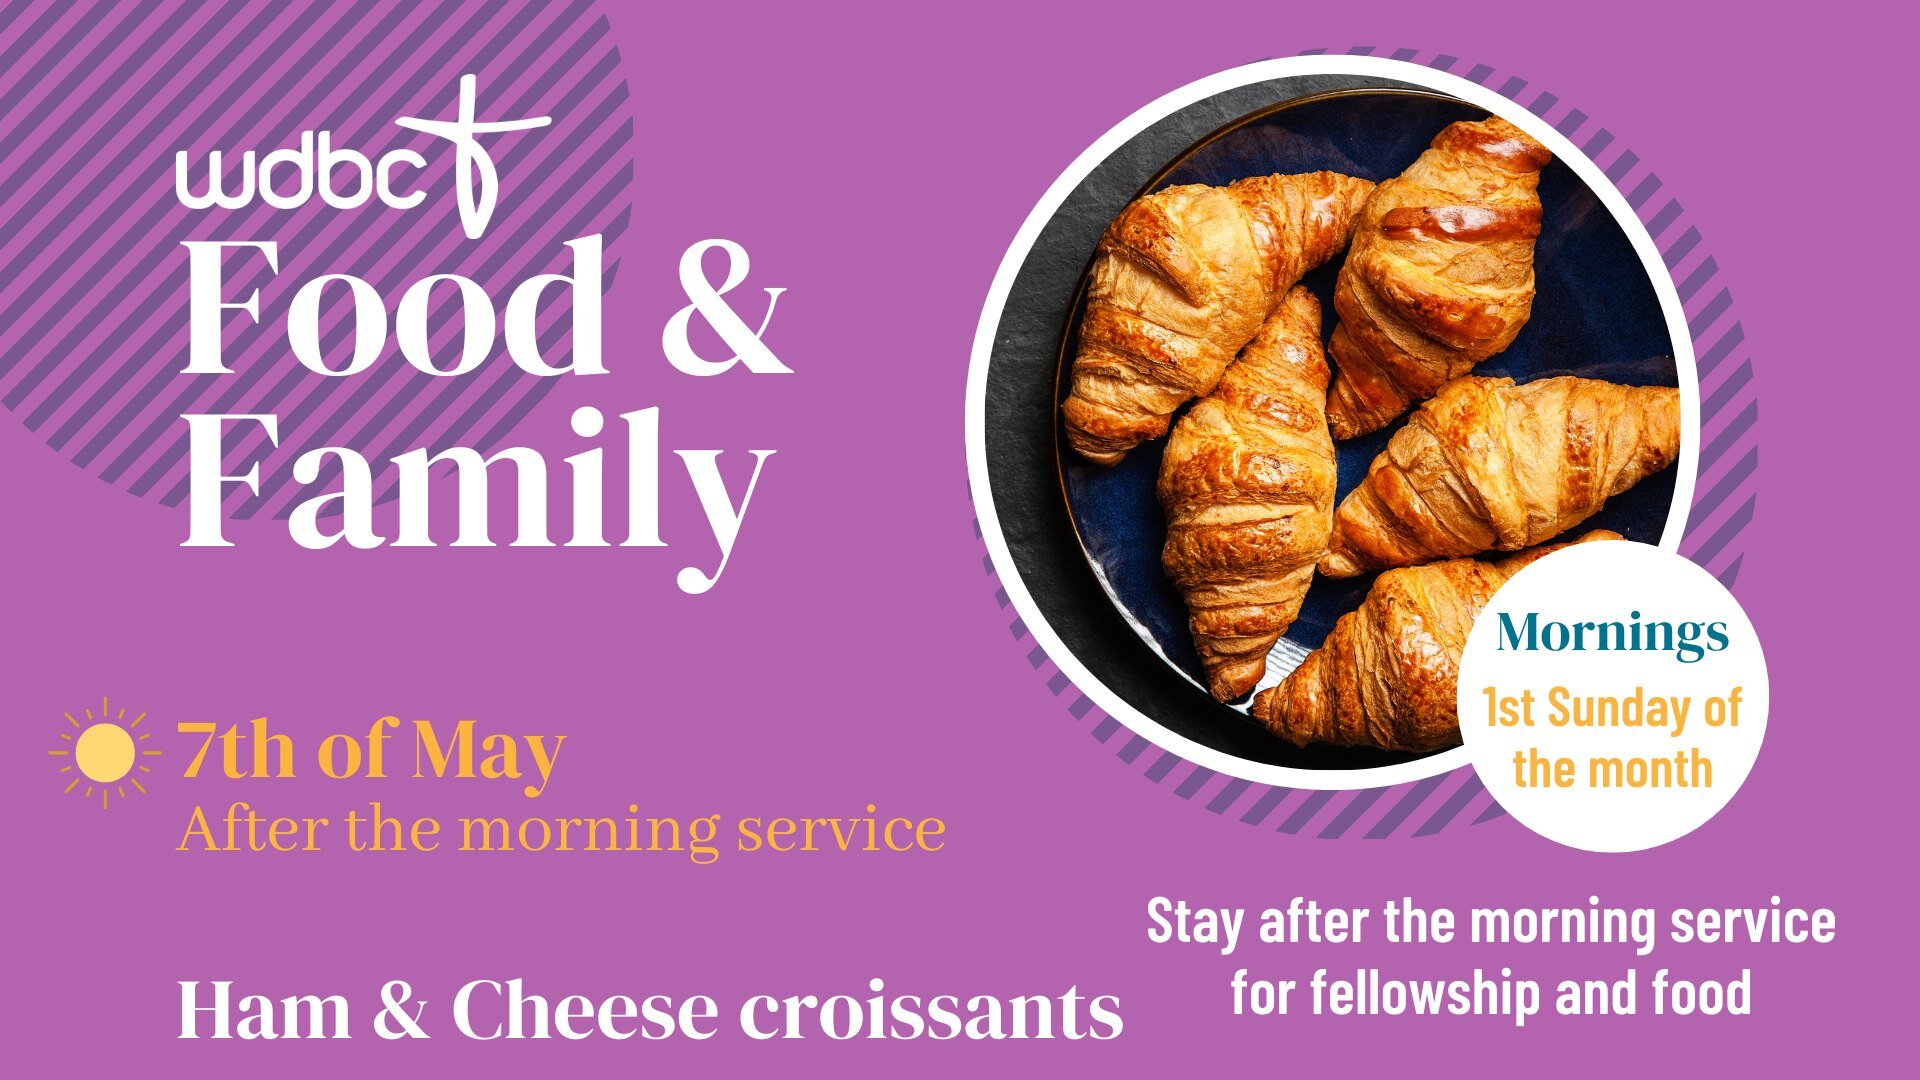 Who doesn't love croissants? 🥐
We welcome you to stay after the morning service for food and fellowship!

&quot;They ate together with glad and sincere hearts.&quot; Acts 2:46